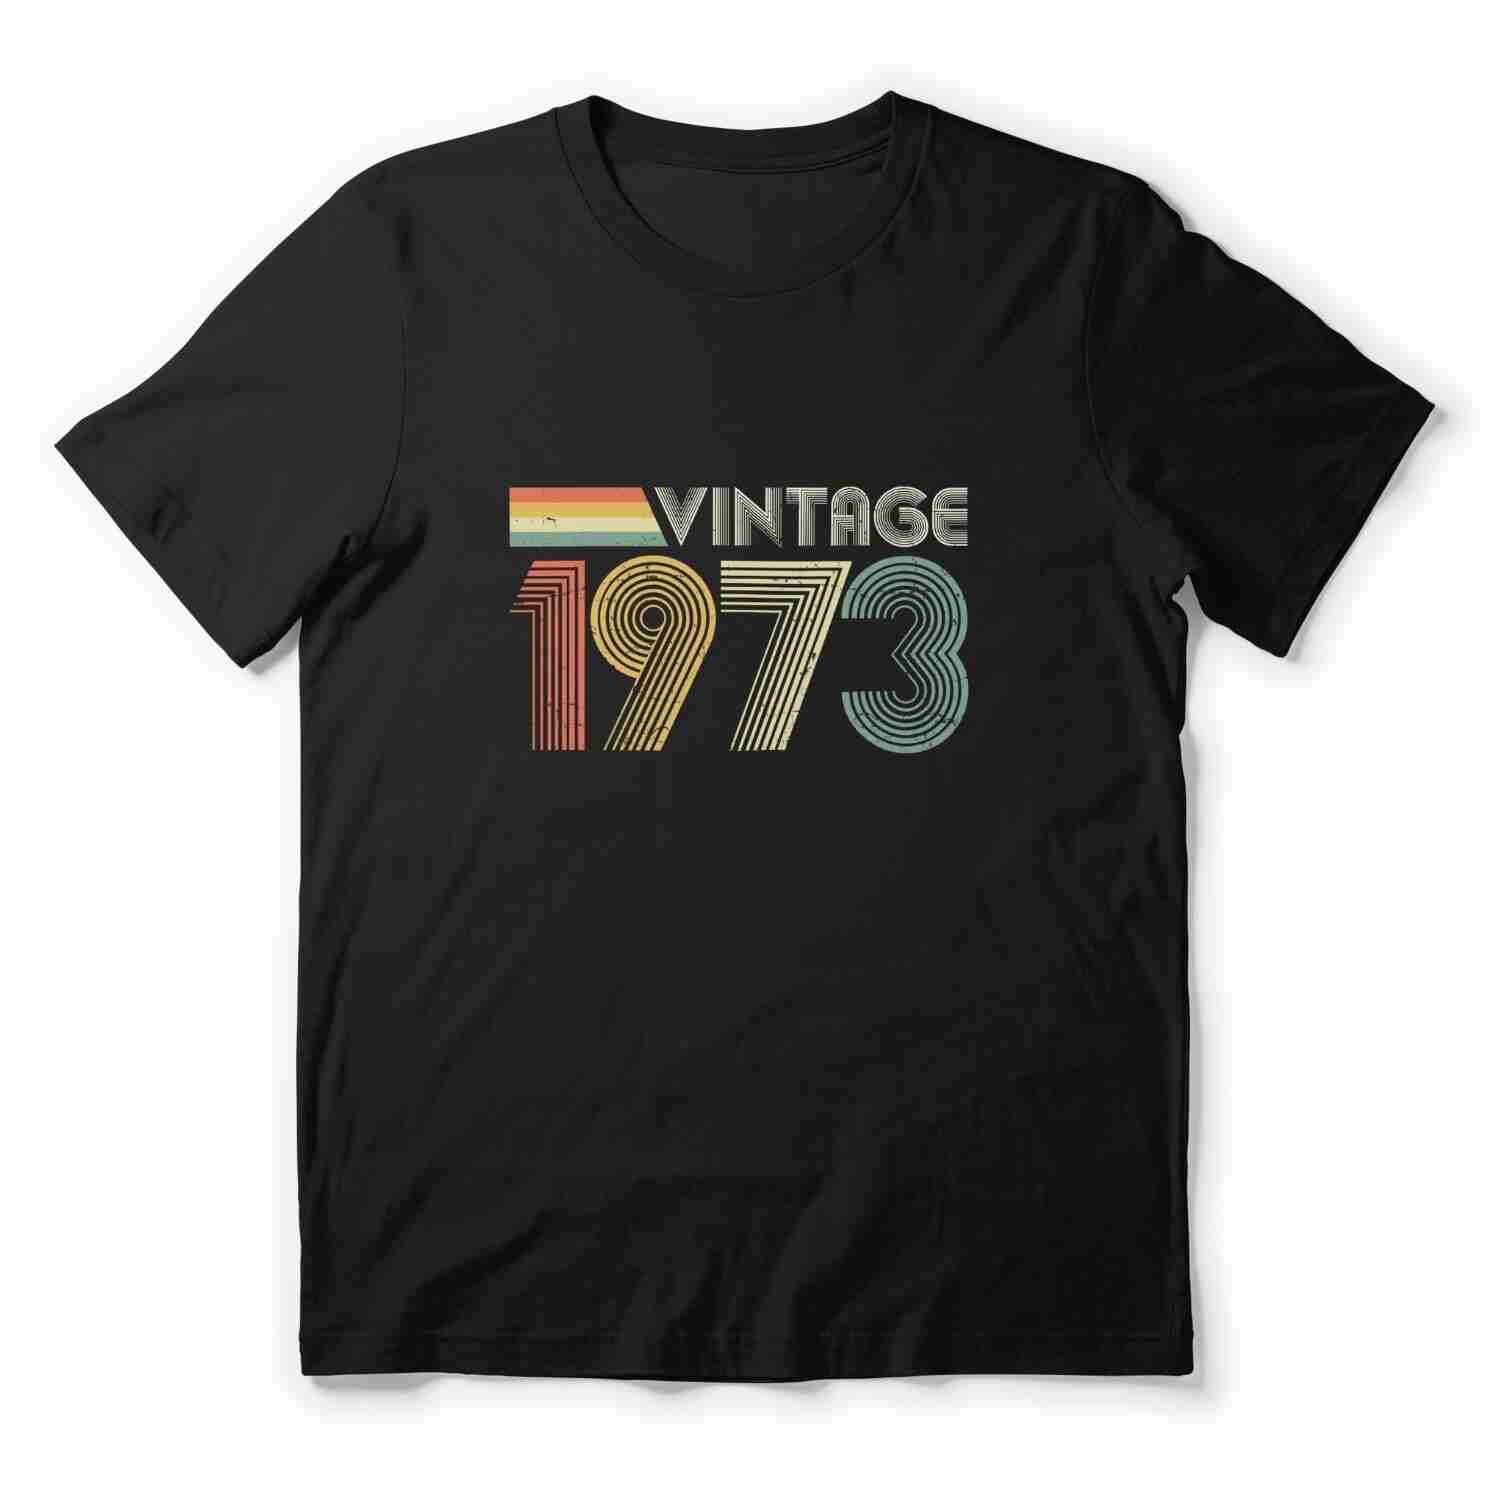 customize-vintage-1973-50th-birthday-gift-t-shirt with cash back rebate